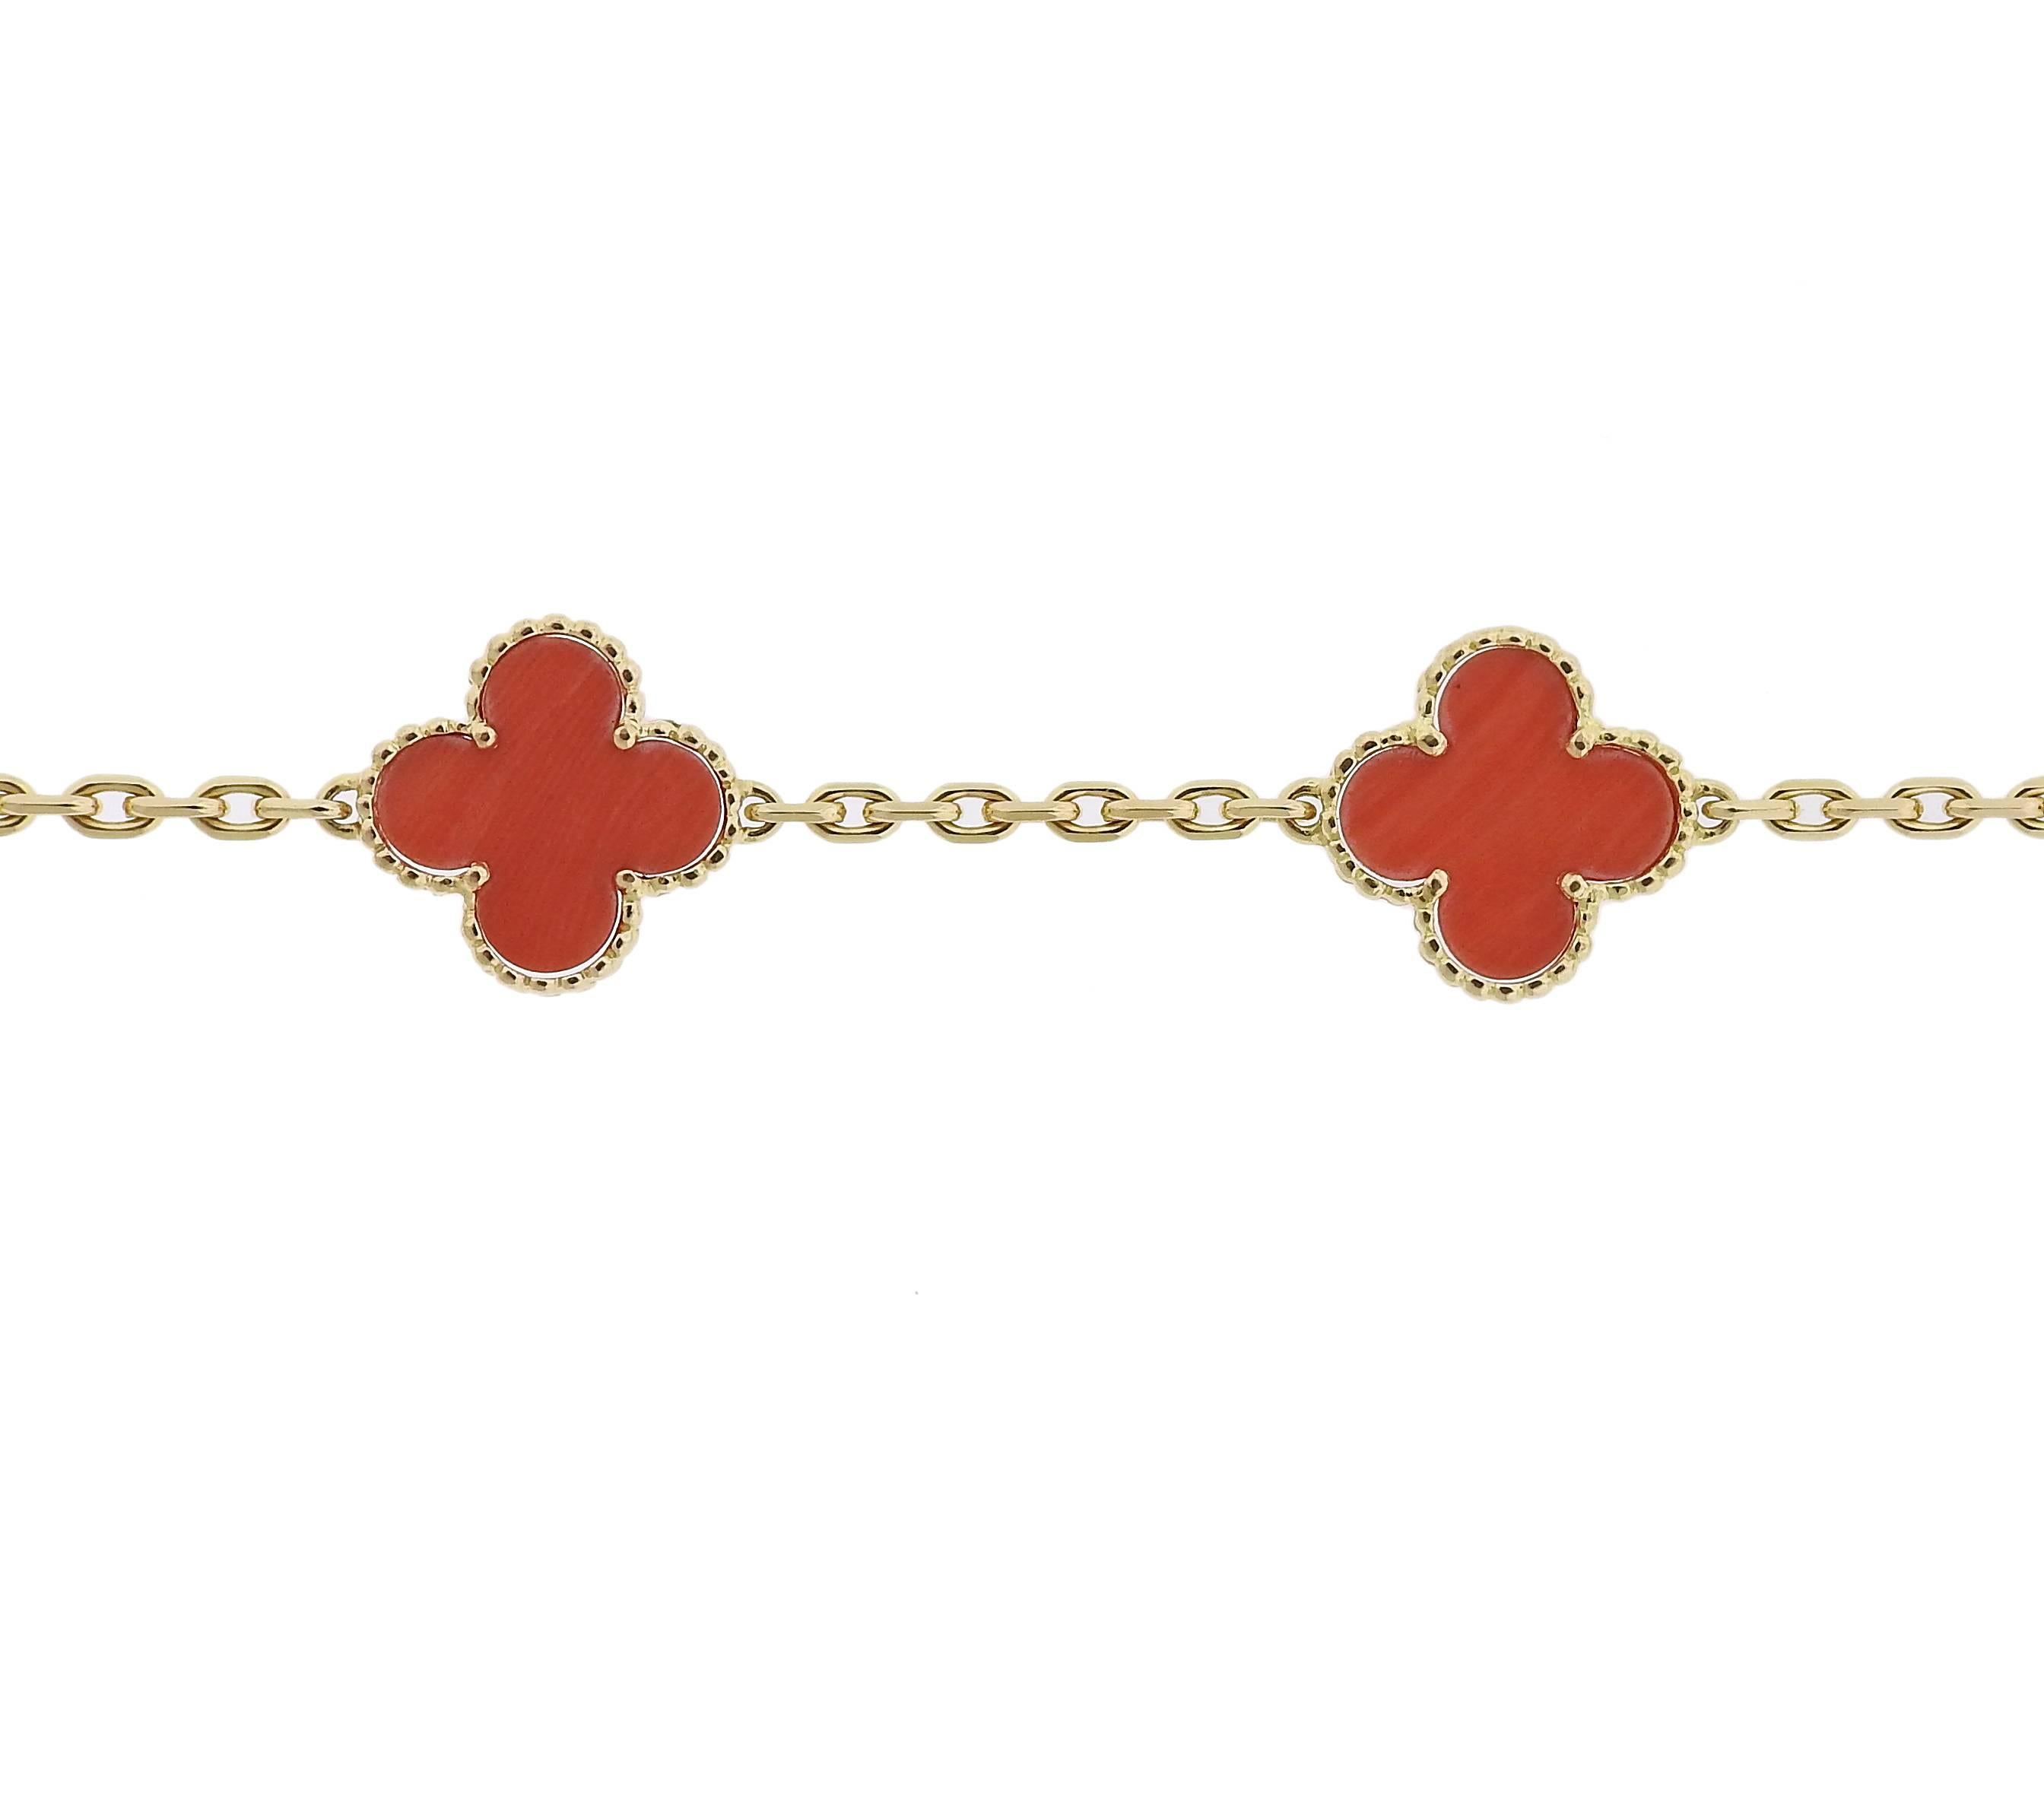 An 18k yellow gold bracelet, crafted by Van Cleef & Arpels for iconic vintage Alhambra collection, set with five coral motifs. Bracelet is 7 1/4" long, clovers measure 14.5mm x 14.5mm. Bracelet weighs 10.3 grams. Marked: BL 109***, VCA,